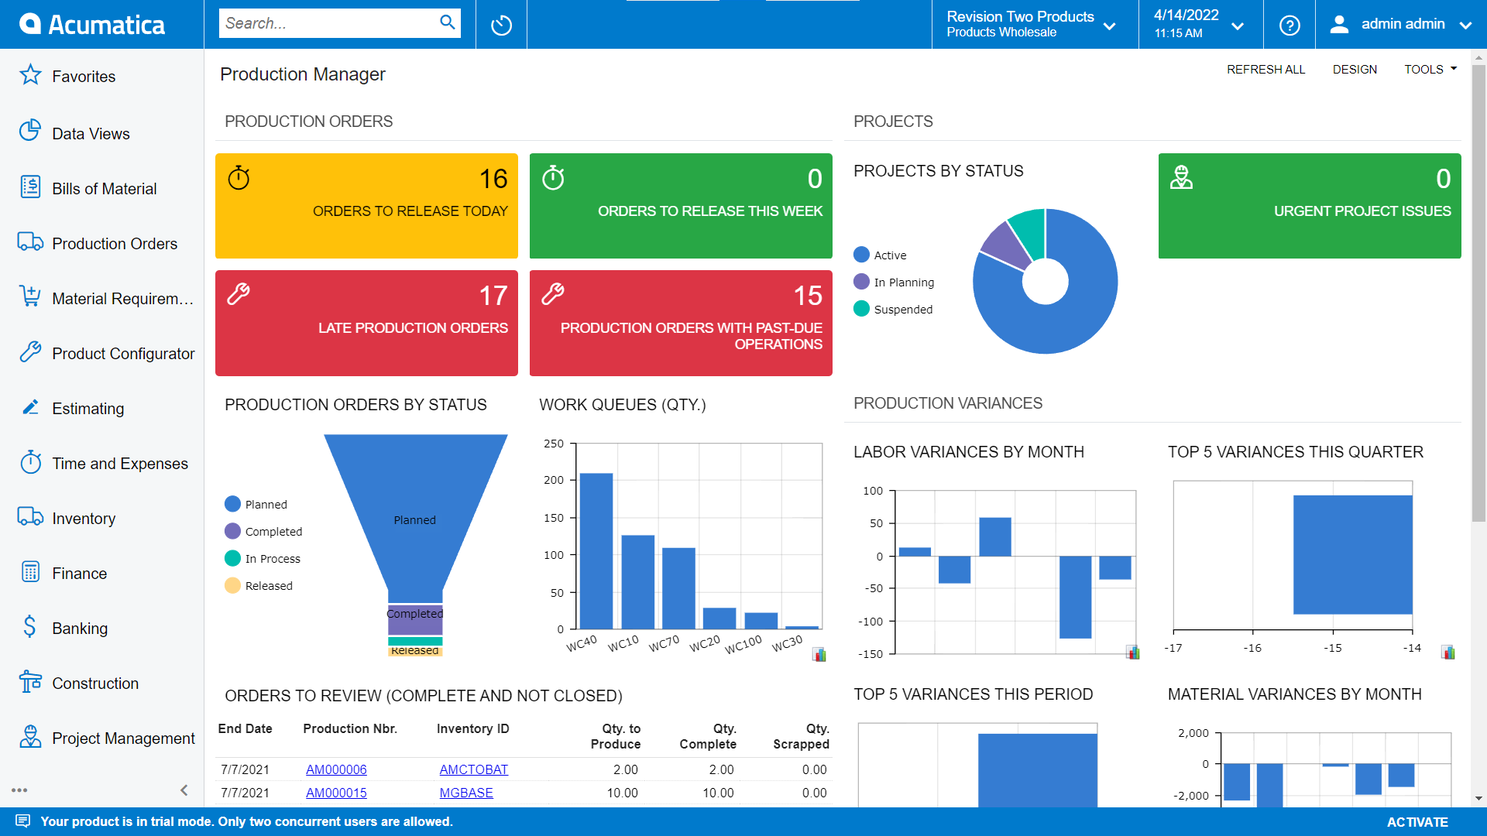 Acumatica Cloud ERP - Production Manager Dashboard